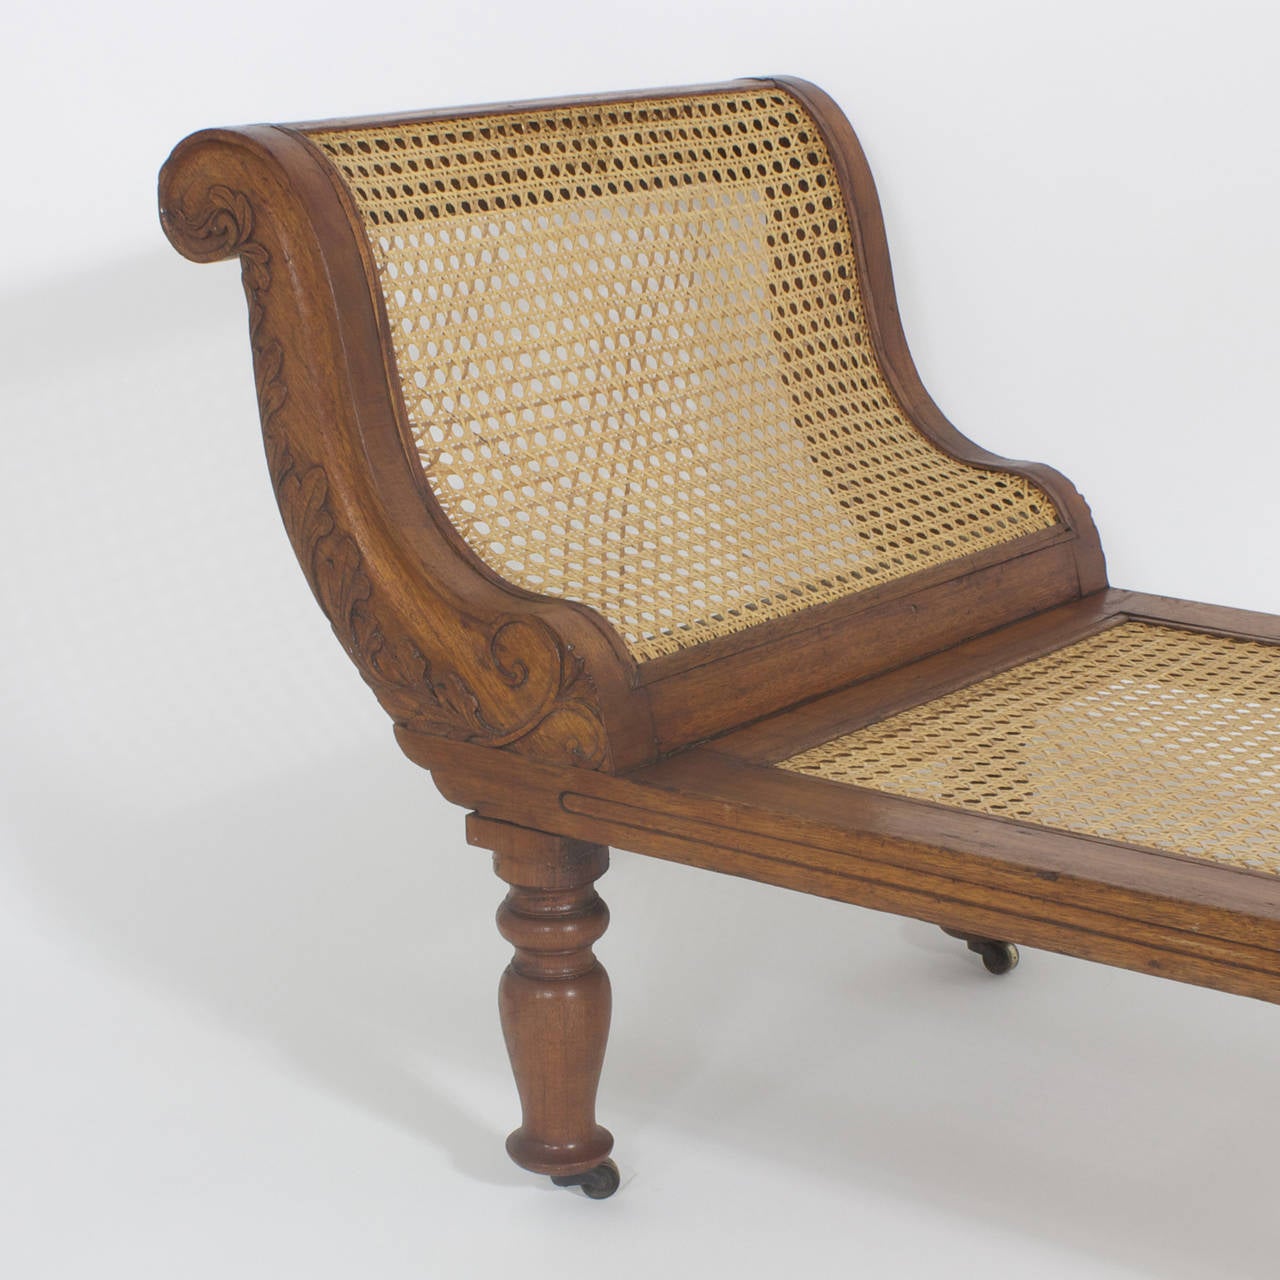 British Colonial 19th Century West Indian Chaise Longue